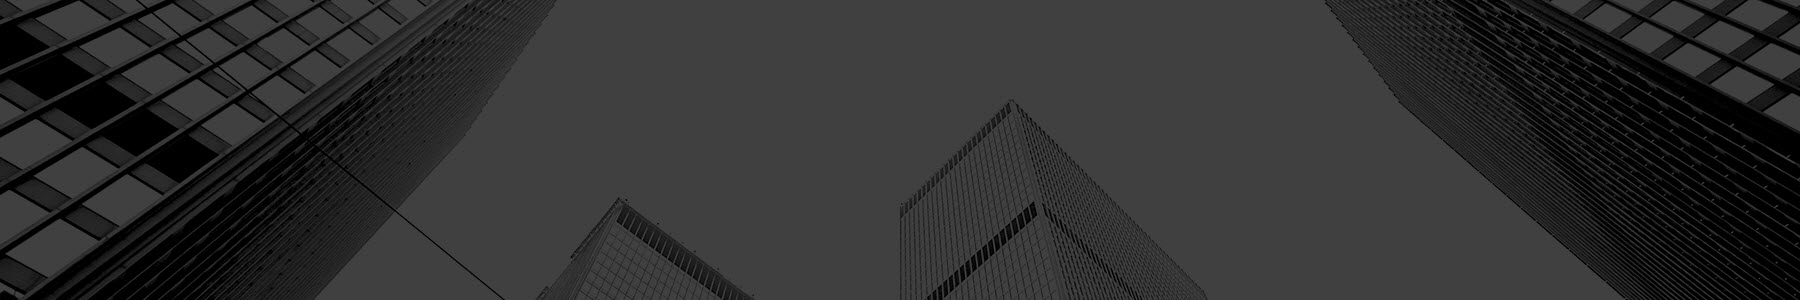 background image tall buildings